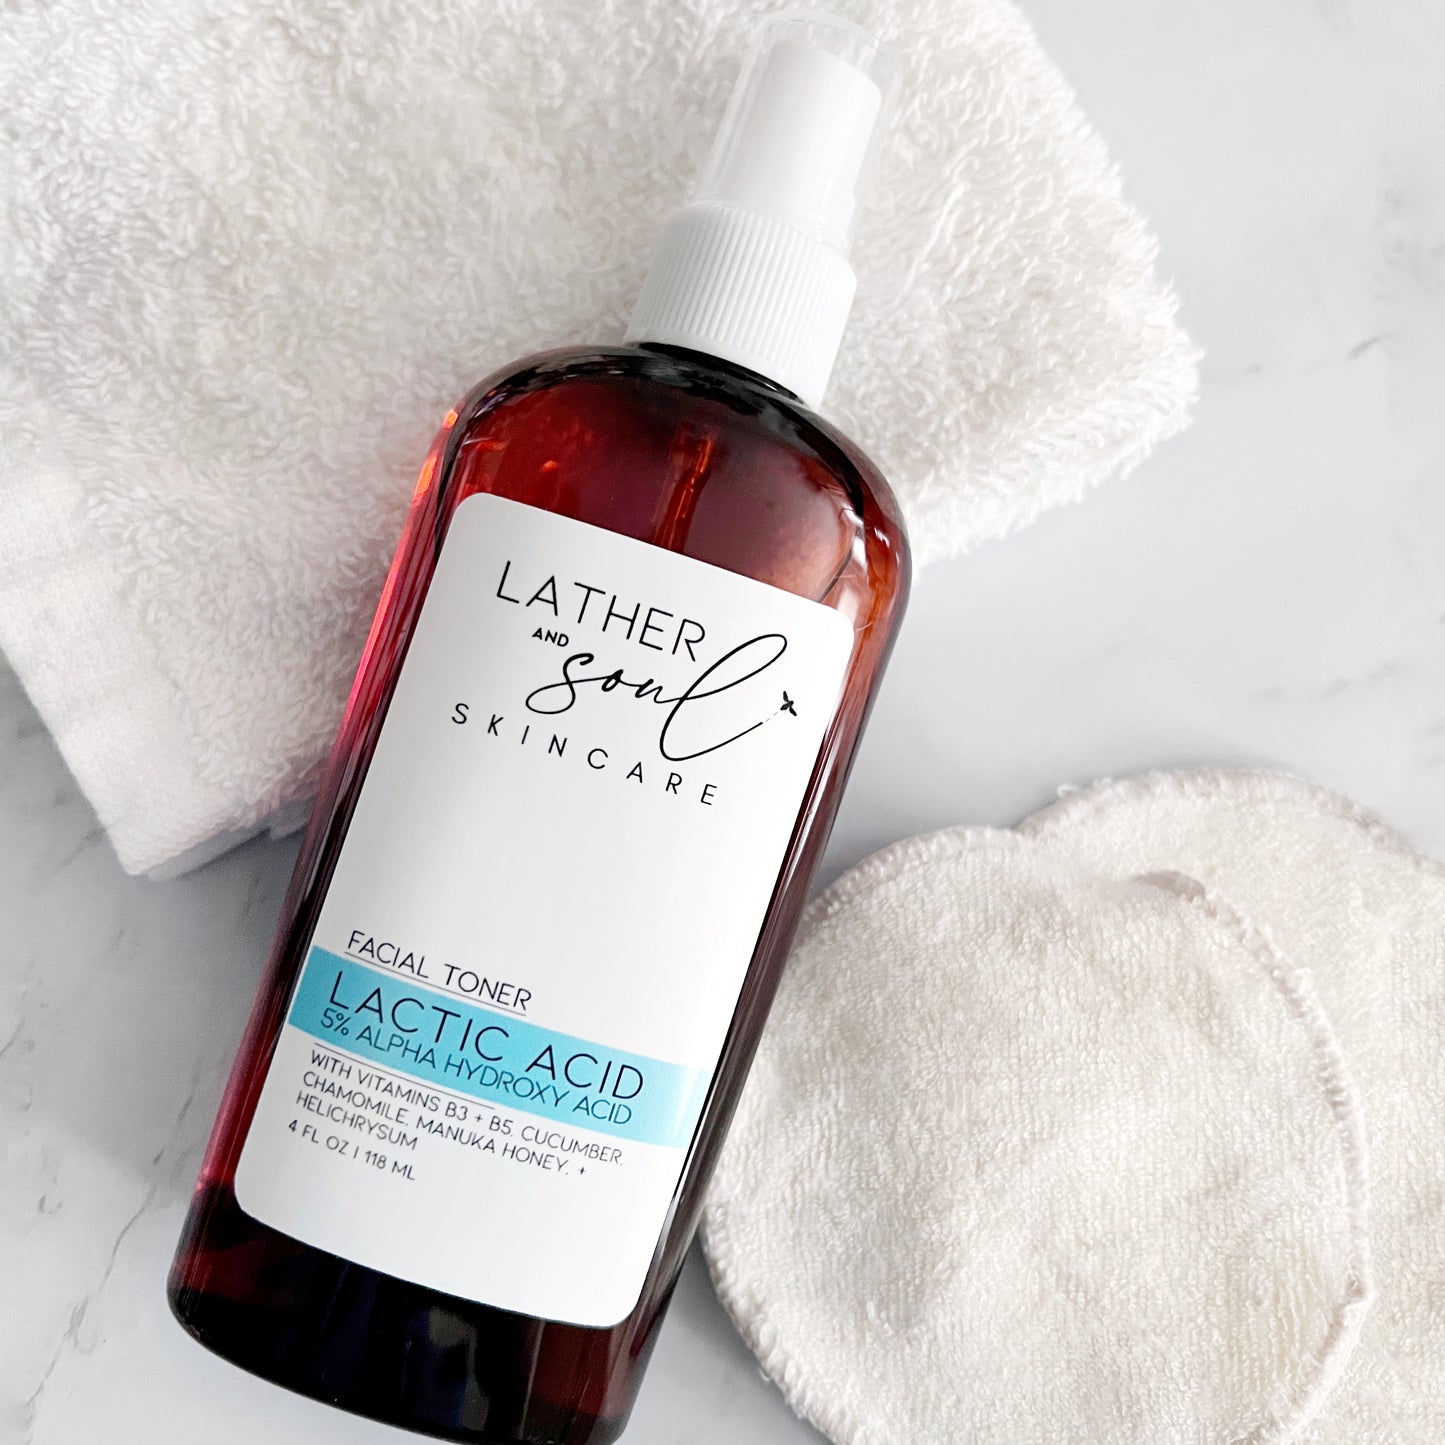 Lactic acid AHA facial toner by Lather and Soul Skincare